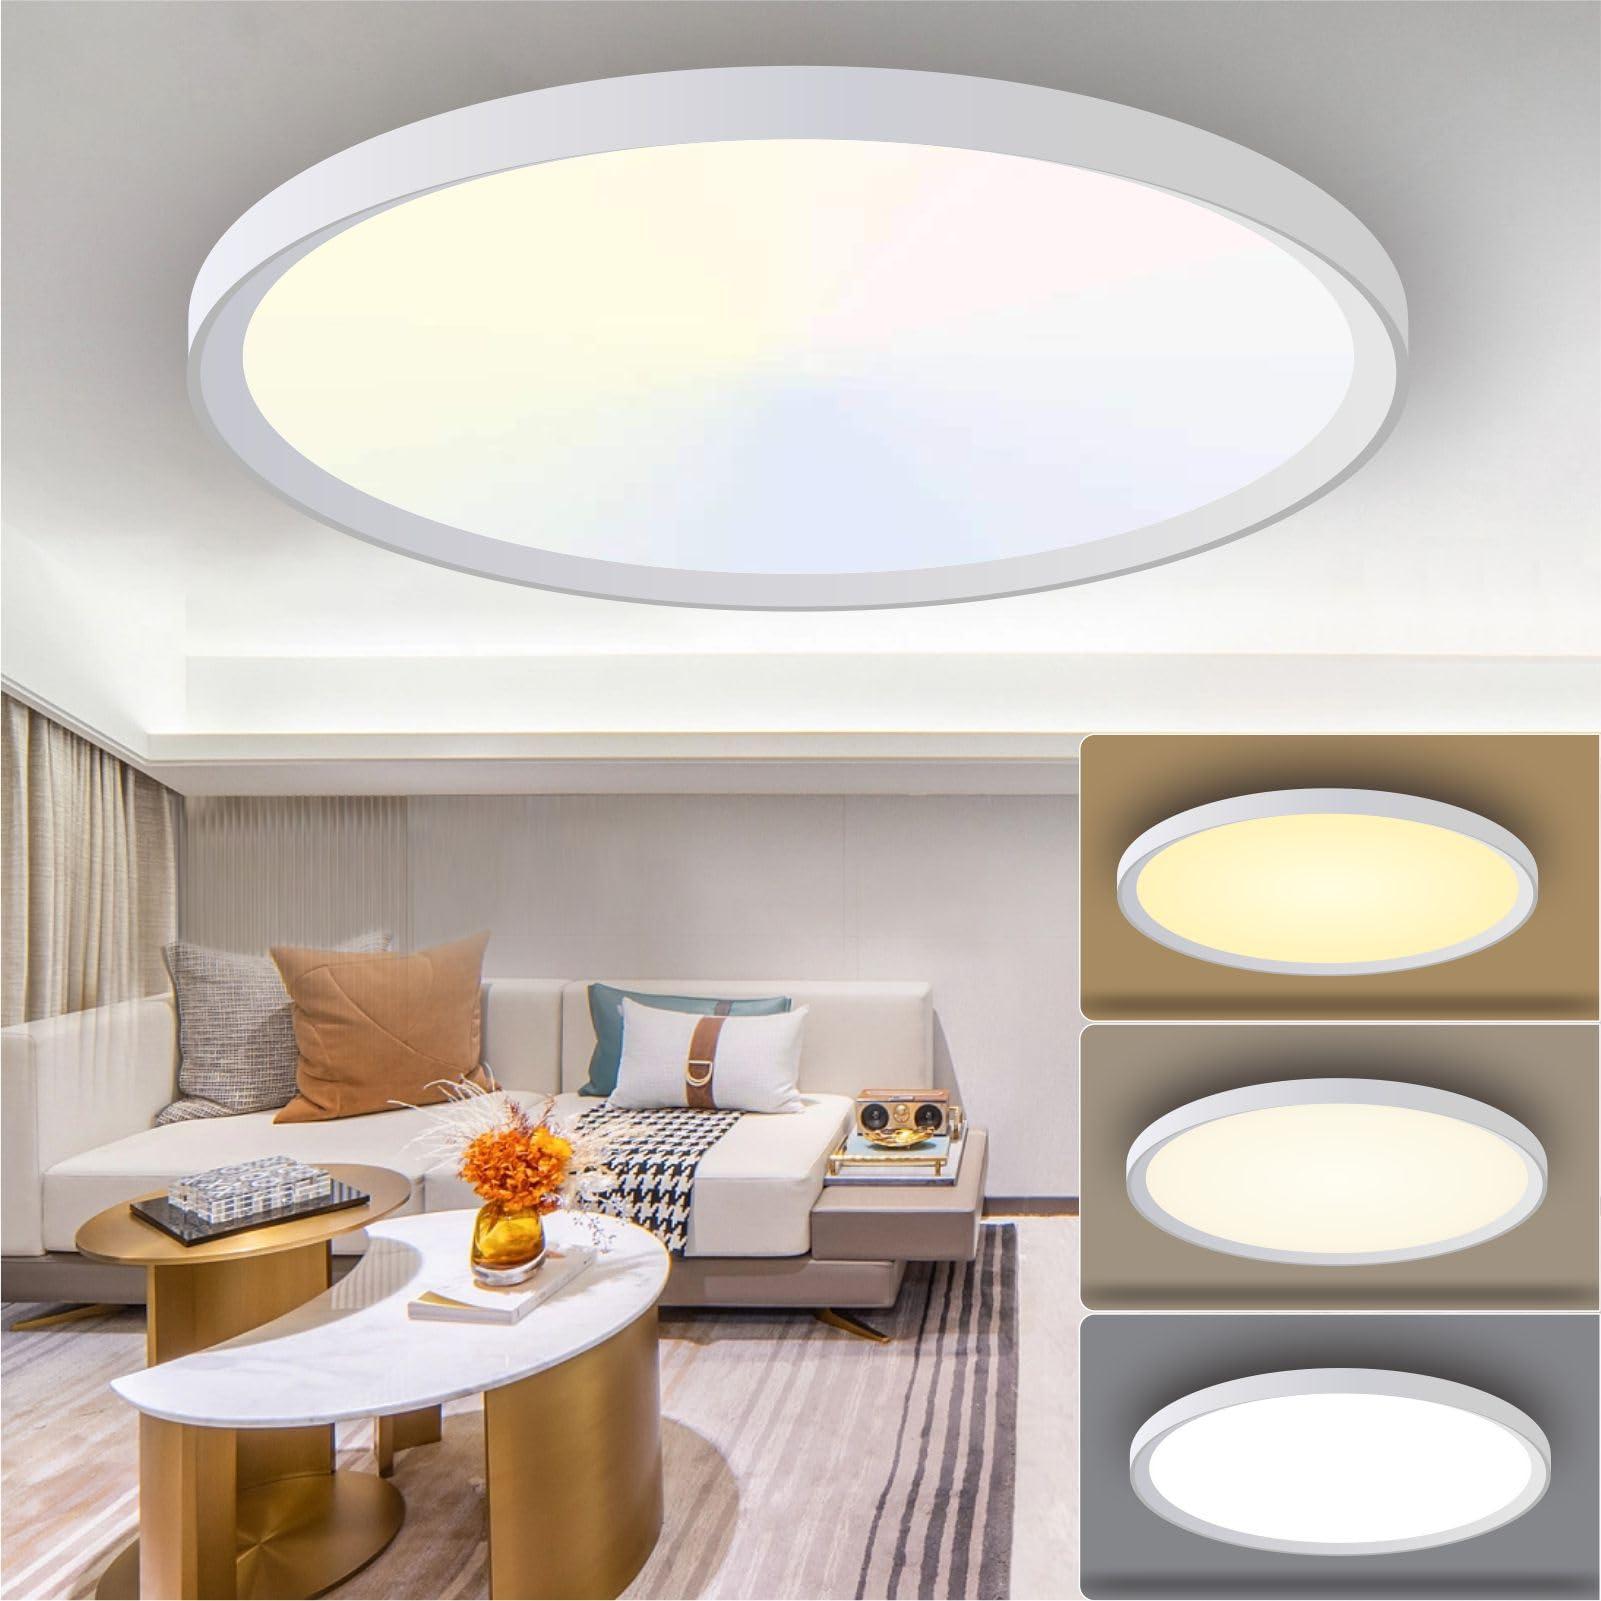 4 Pack Bathroom Light, 18W 1800LM Ceiling Lights, 3000K/4500K/6000K, 3 Color Temperature Flush Ceiling Light, Waterproof Round Ultra Thin Ceiling Light for Kitchen,Toilet,Porch,Bedroom,Utility Room